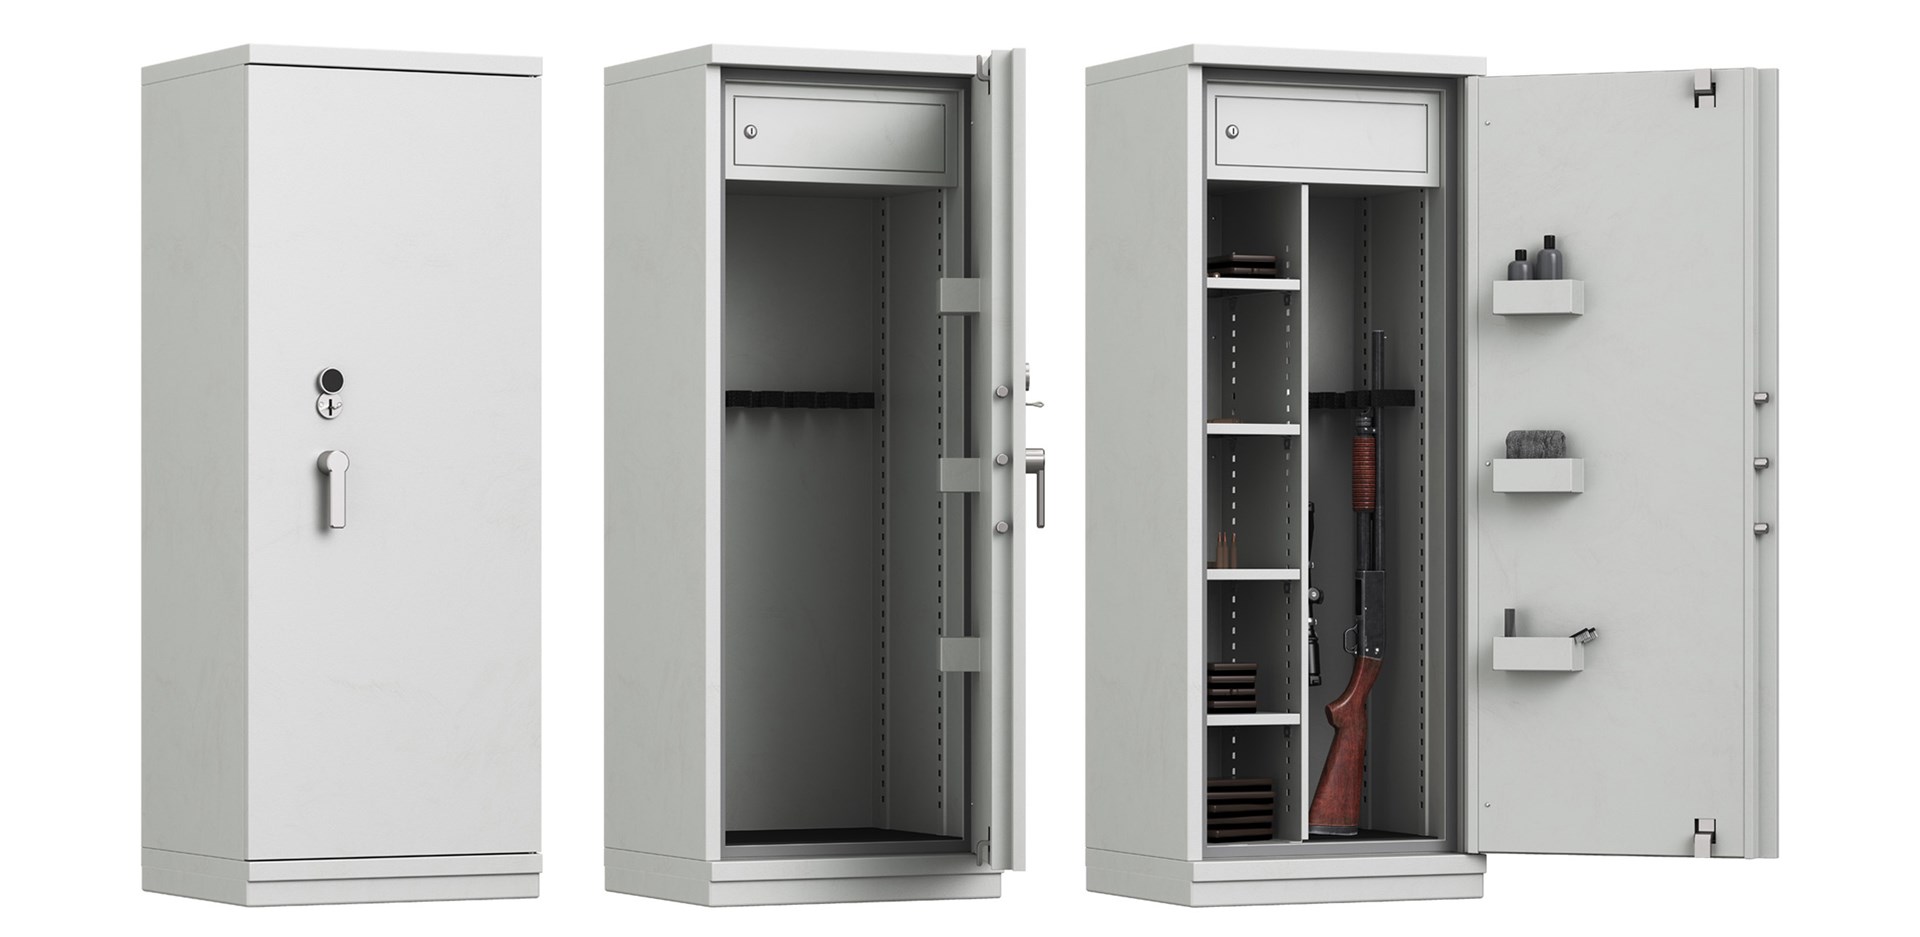 Weapon cabinets: VPO – 1580/600 model